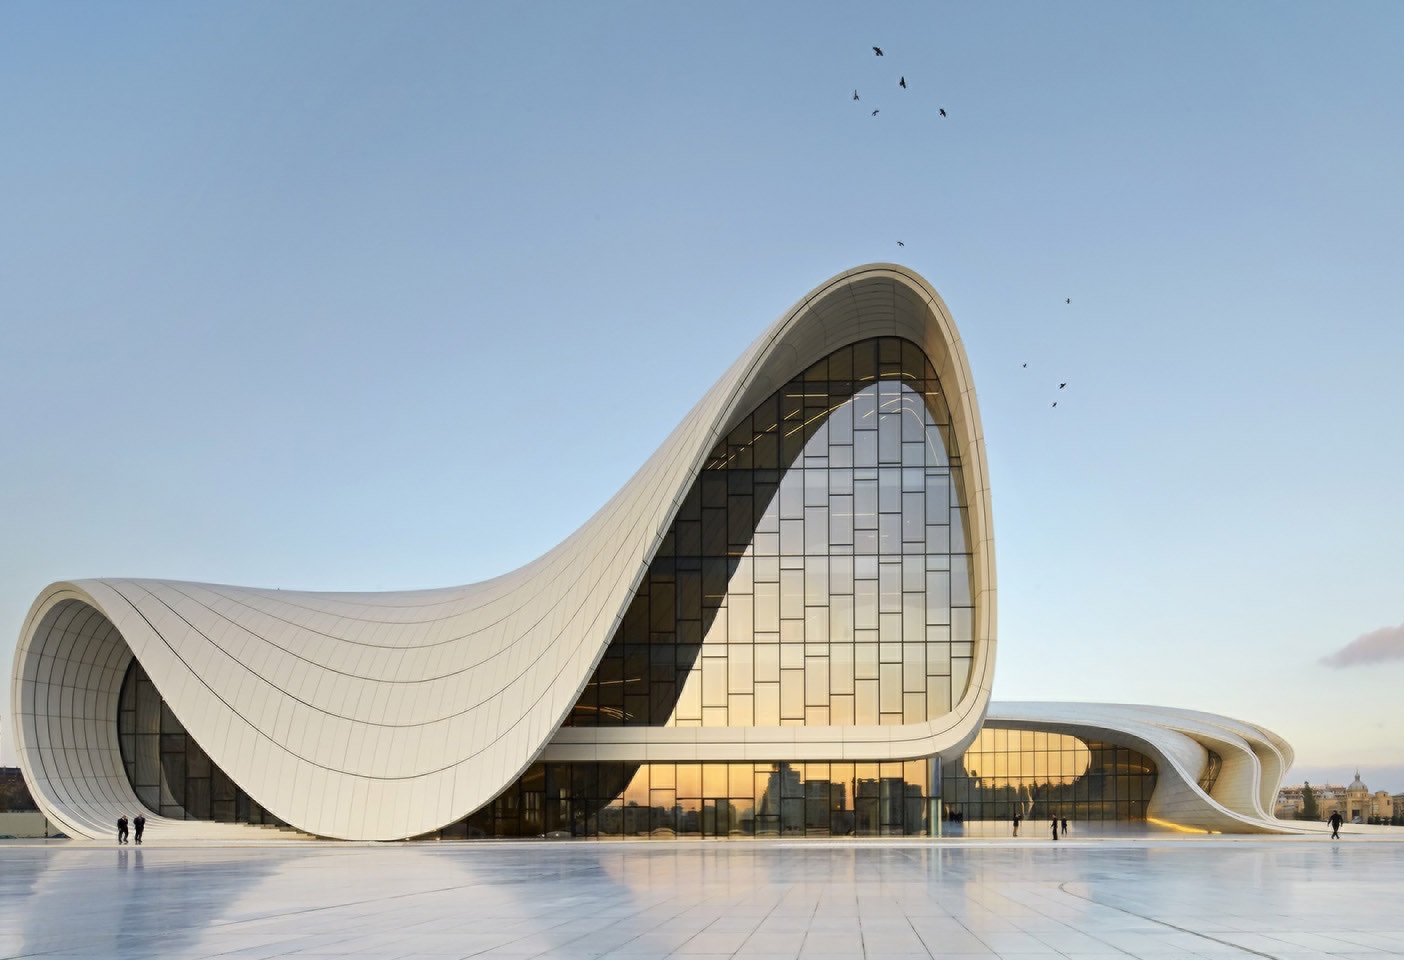 Architect Zaha Hadid's Heydar Aliyev Cultural Centre in Baku, Azerbaijan, is described by Fathanah as 'truly extraordinary,' with a silhouette that flows inside 'creating a unique experience on every turn'. Photo c/o  Heydar Aliyev Cultural Centre.